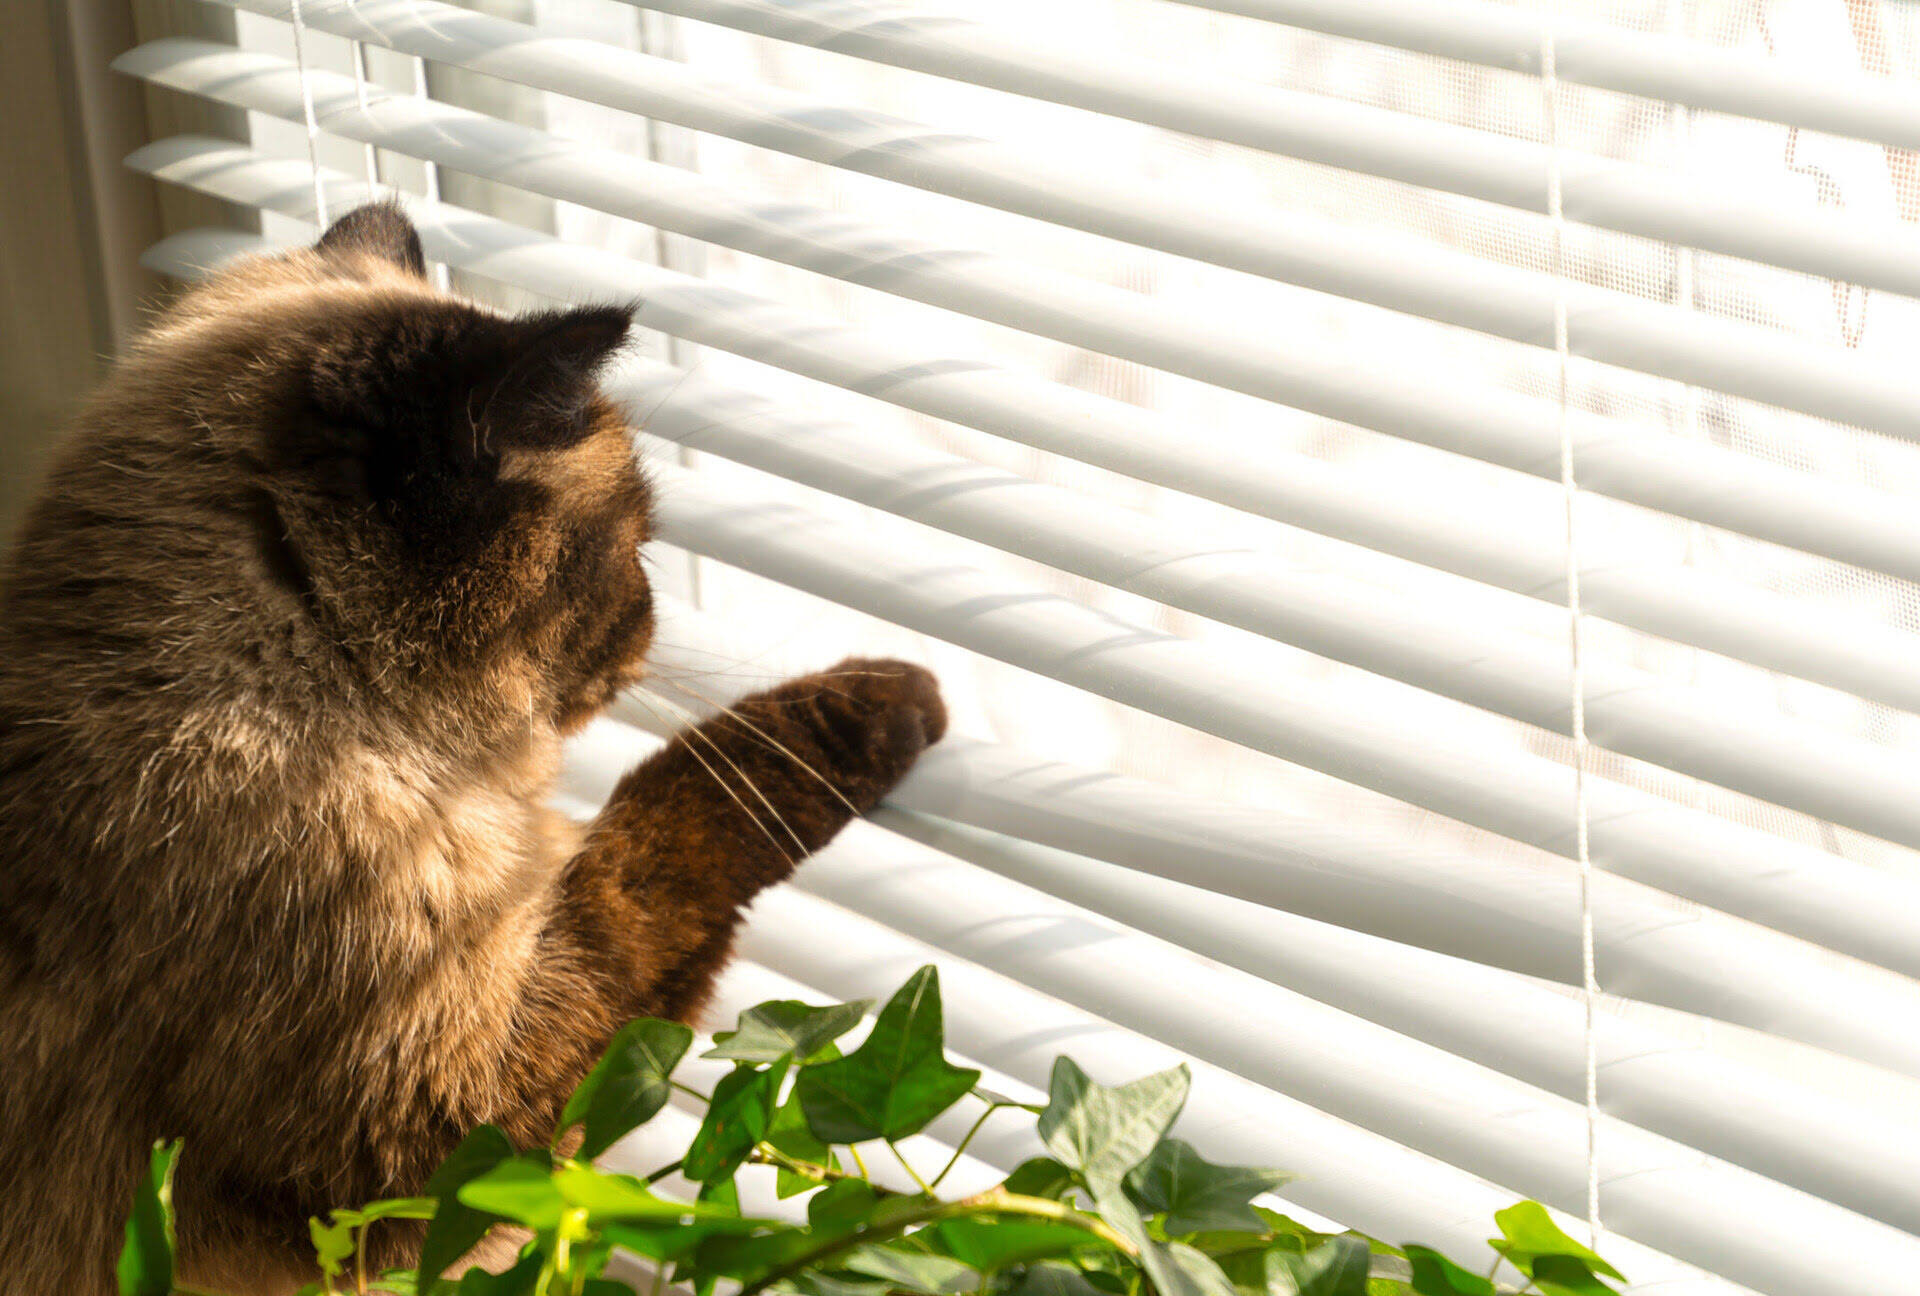 How To Keep Cats Out Of Window Blinds